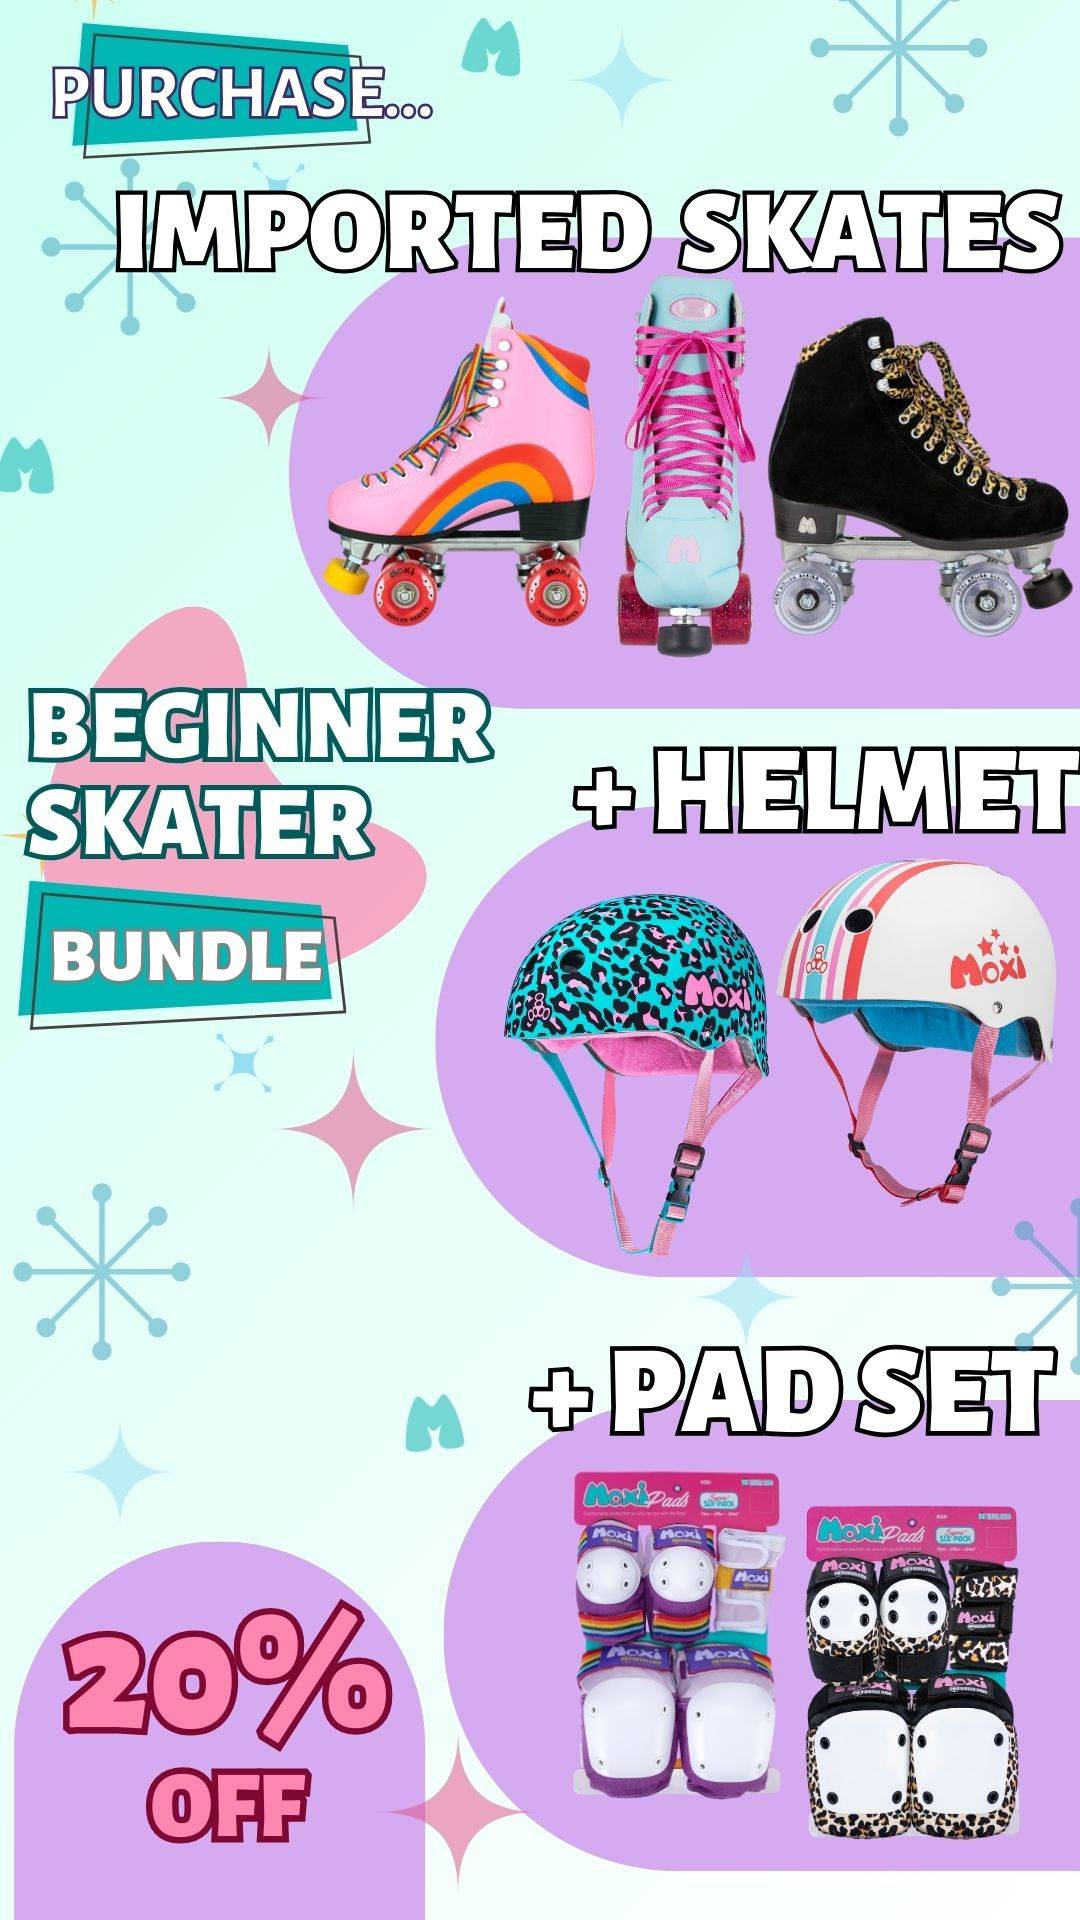 Beginner Skater Bundle. purchase imported skates with a helmet and pads and get 15% off